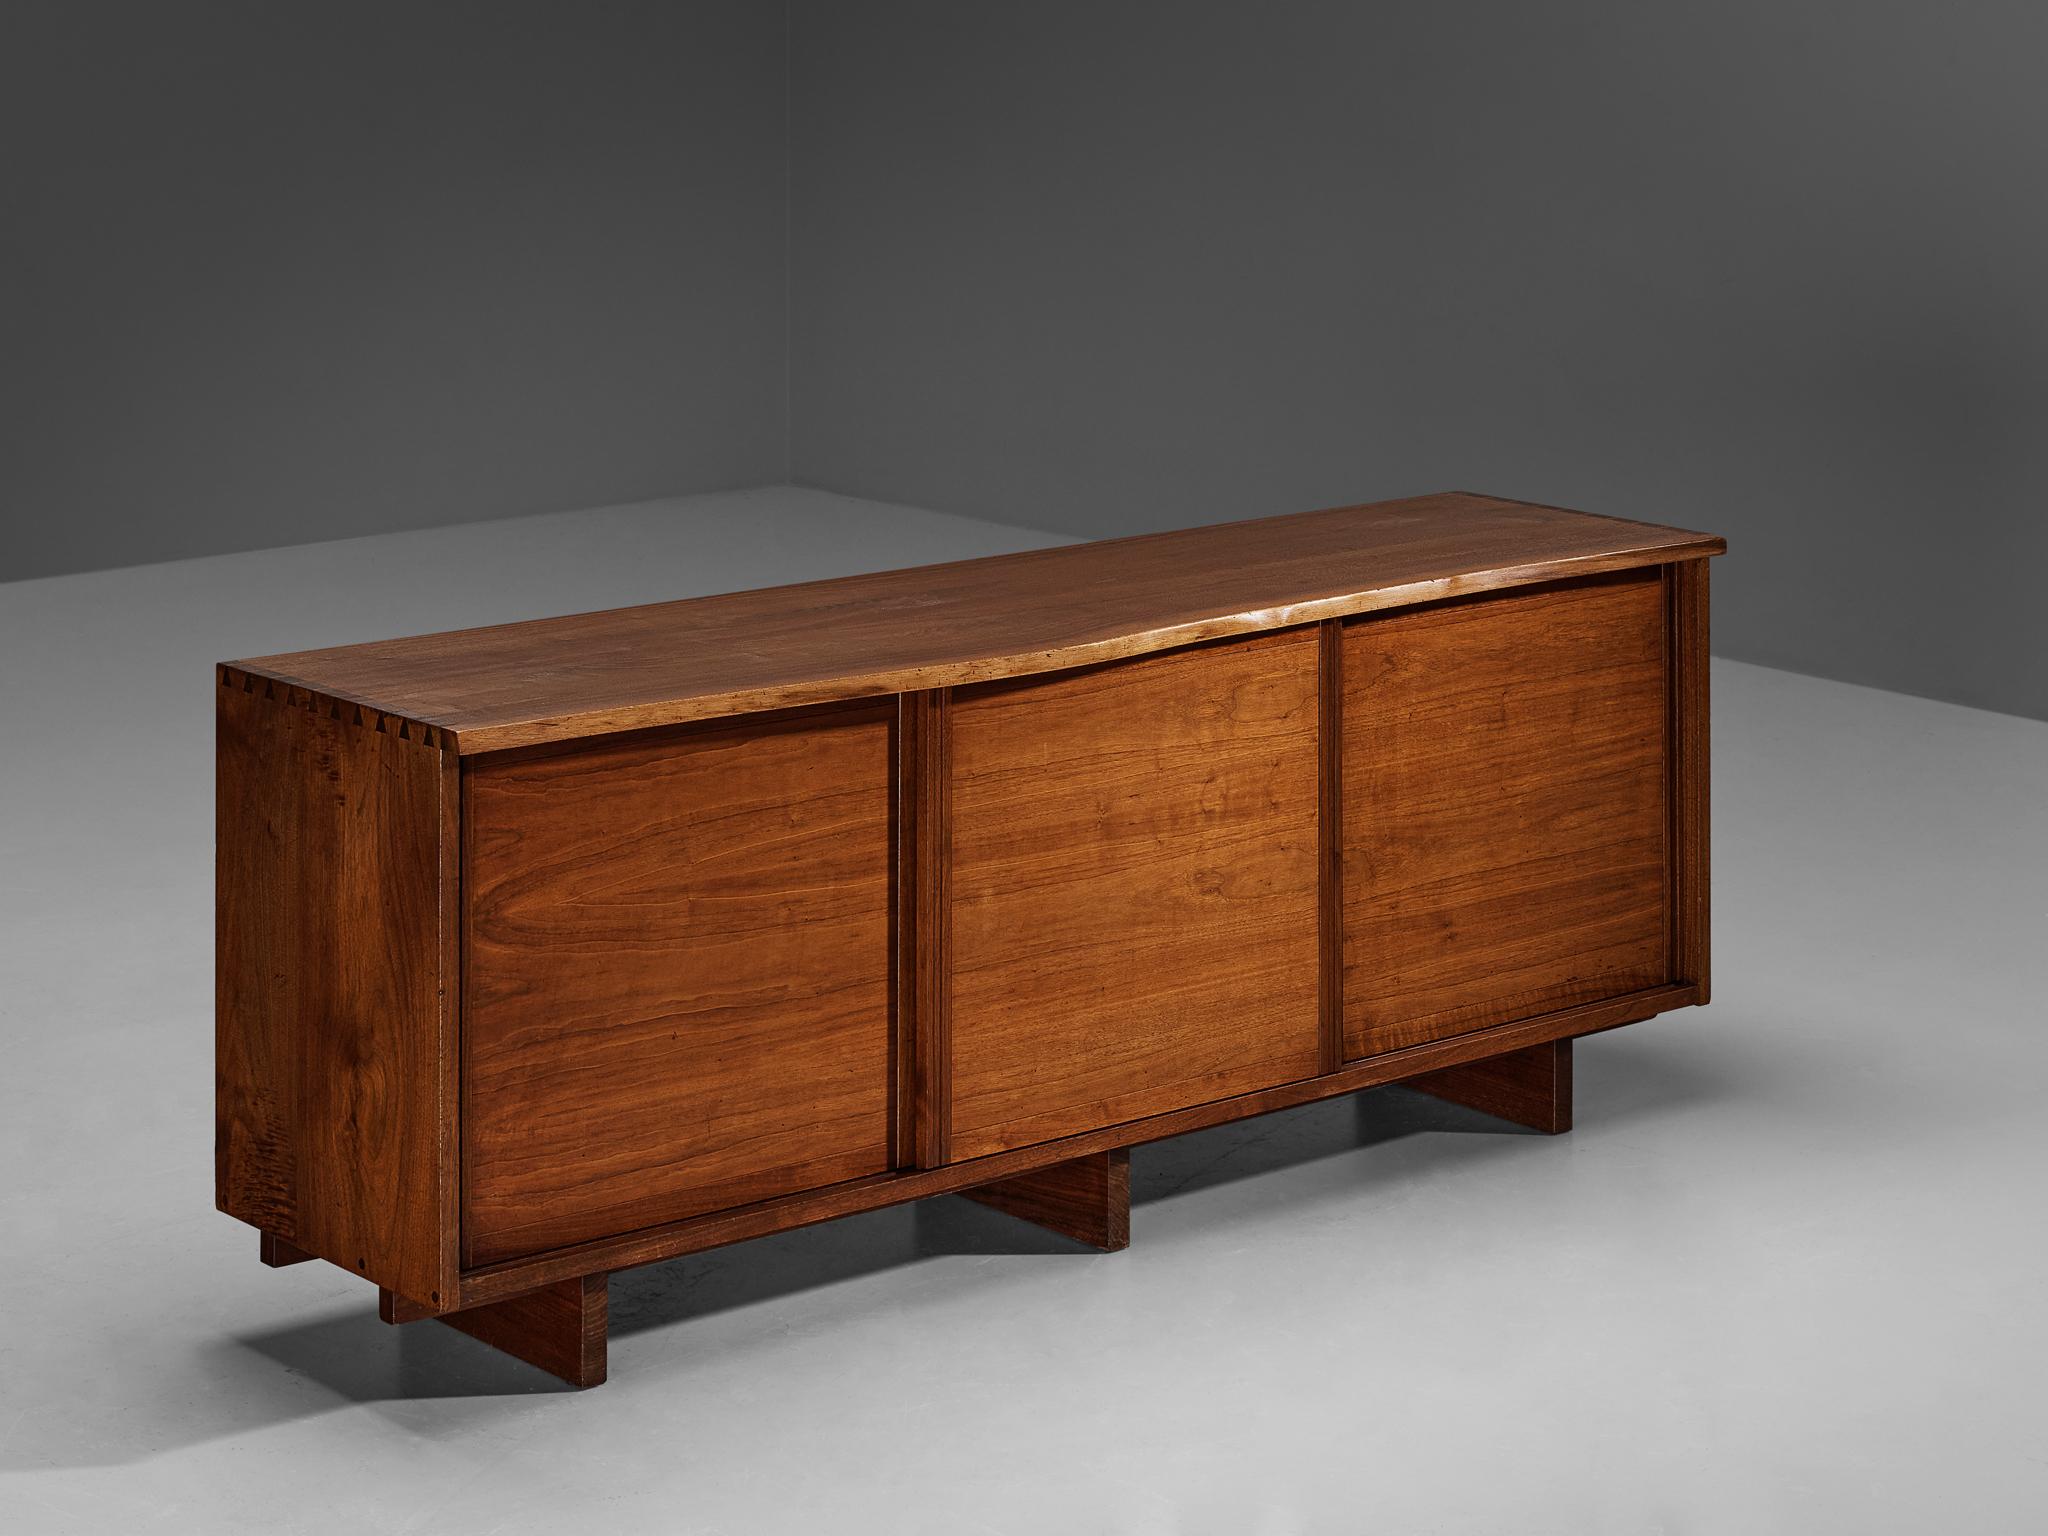 George Nakashima, sideboard, American black walnut, United States, 1961

With regard to its essential form, material use, and woodwork, this triple-sliding door cabinet is a testimony to George Nakashima's expert craftsmanship and distinctive